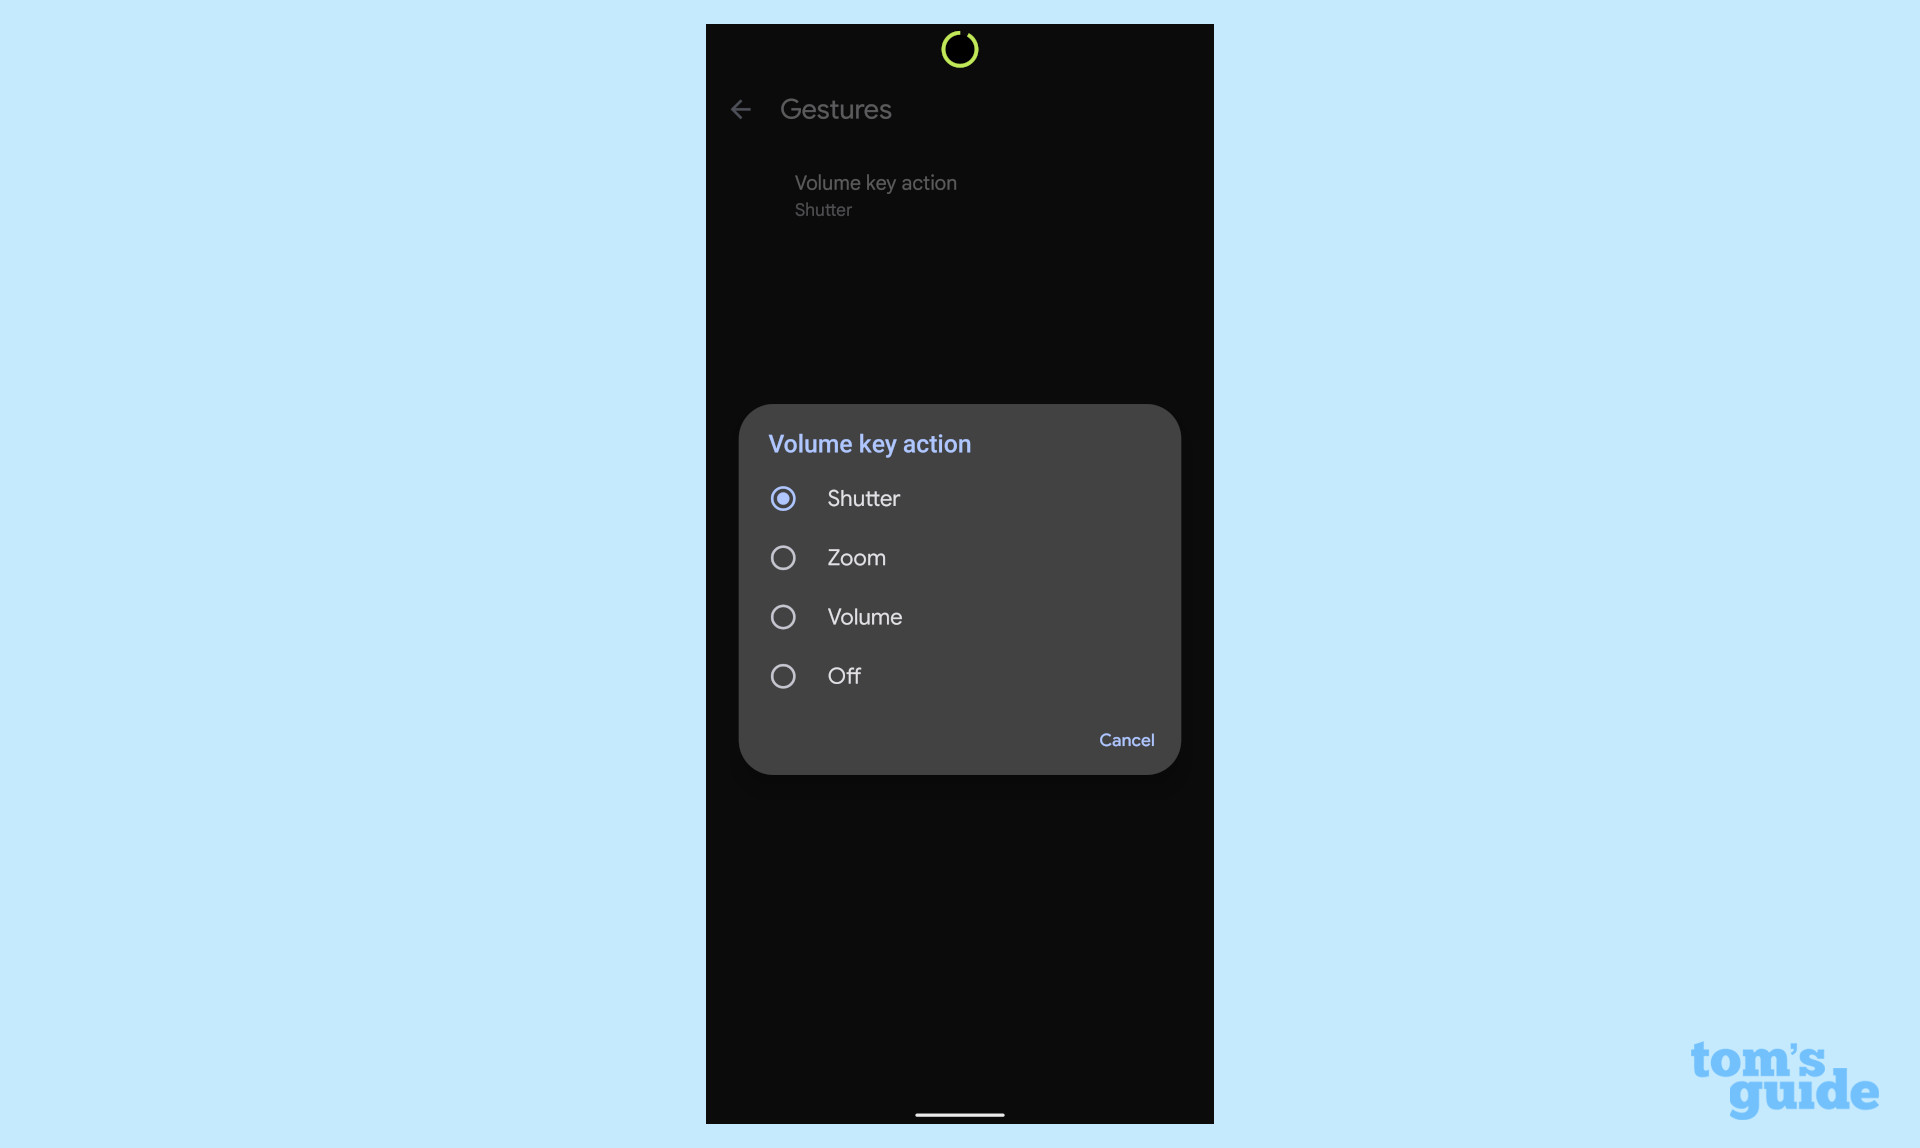 pixel 6 features to enable: camera volume key action